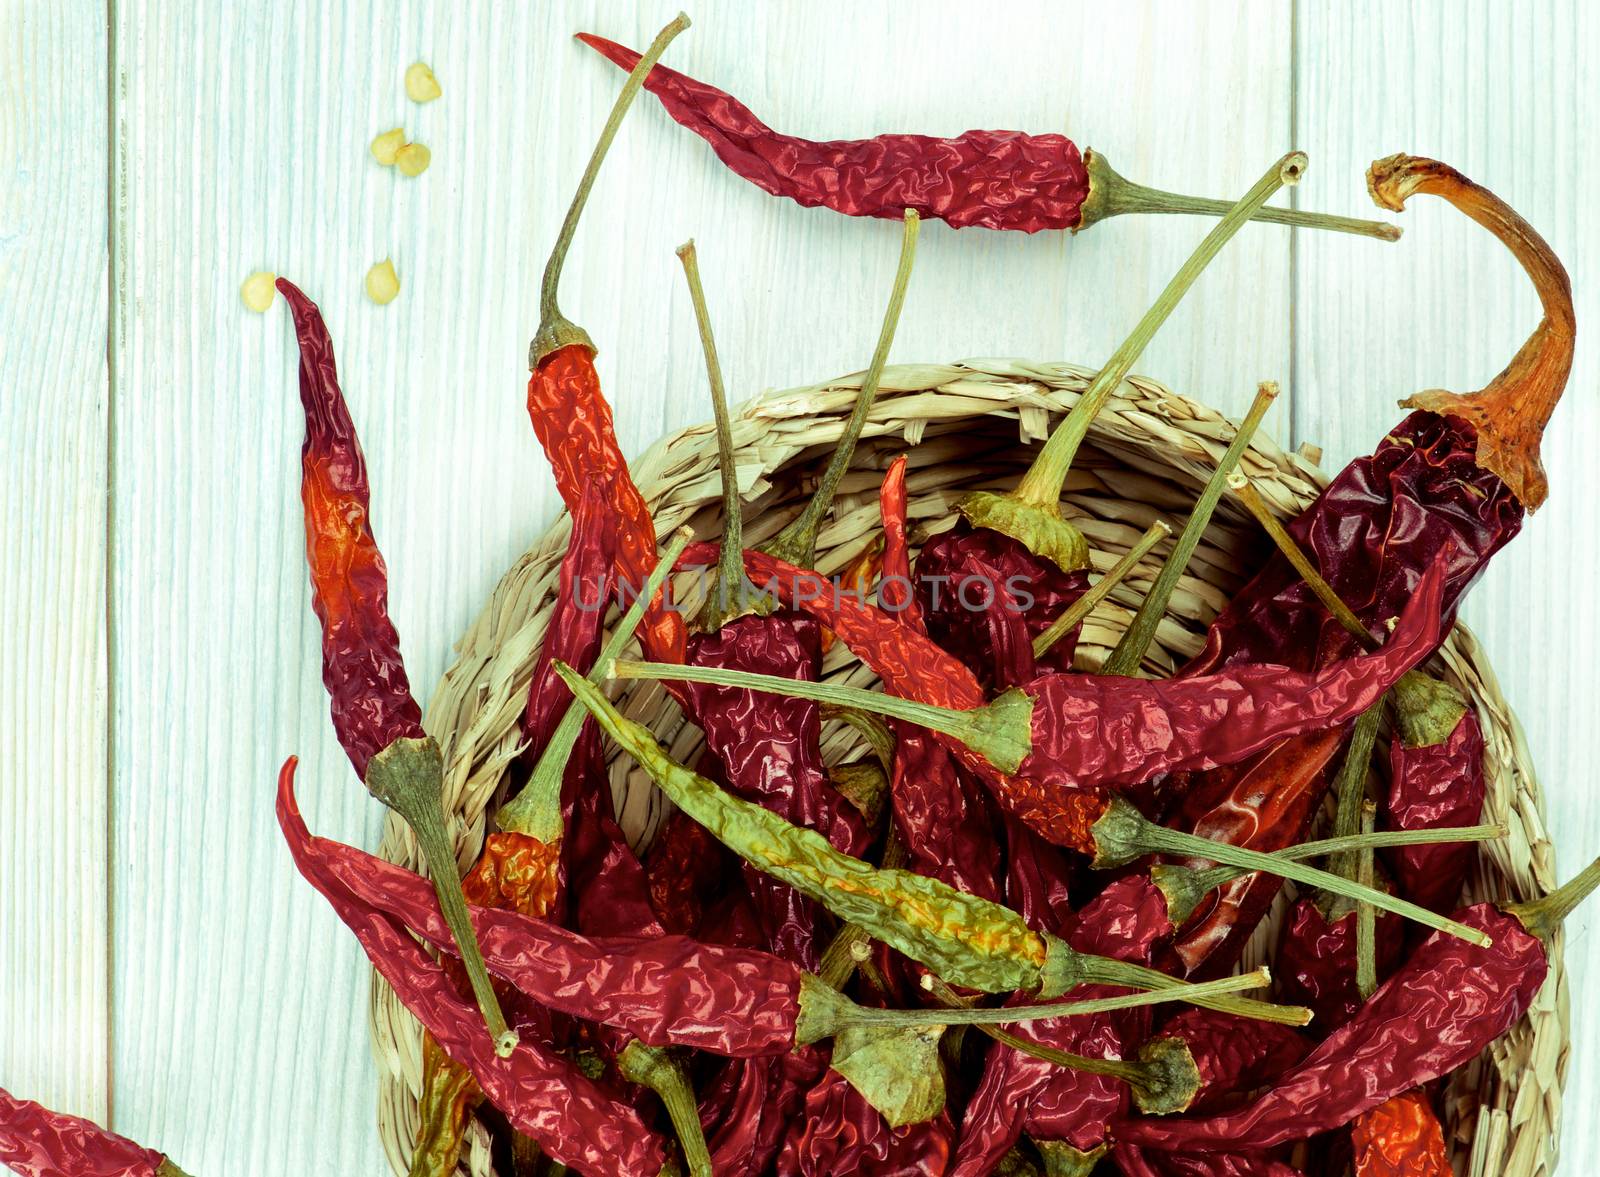 Arrangement of Dried Chili Peppers Full Body with Stems  and Seeds in Wicker Bowl Cross Section on Light Green Wooden background